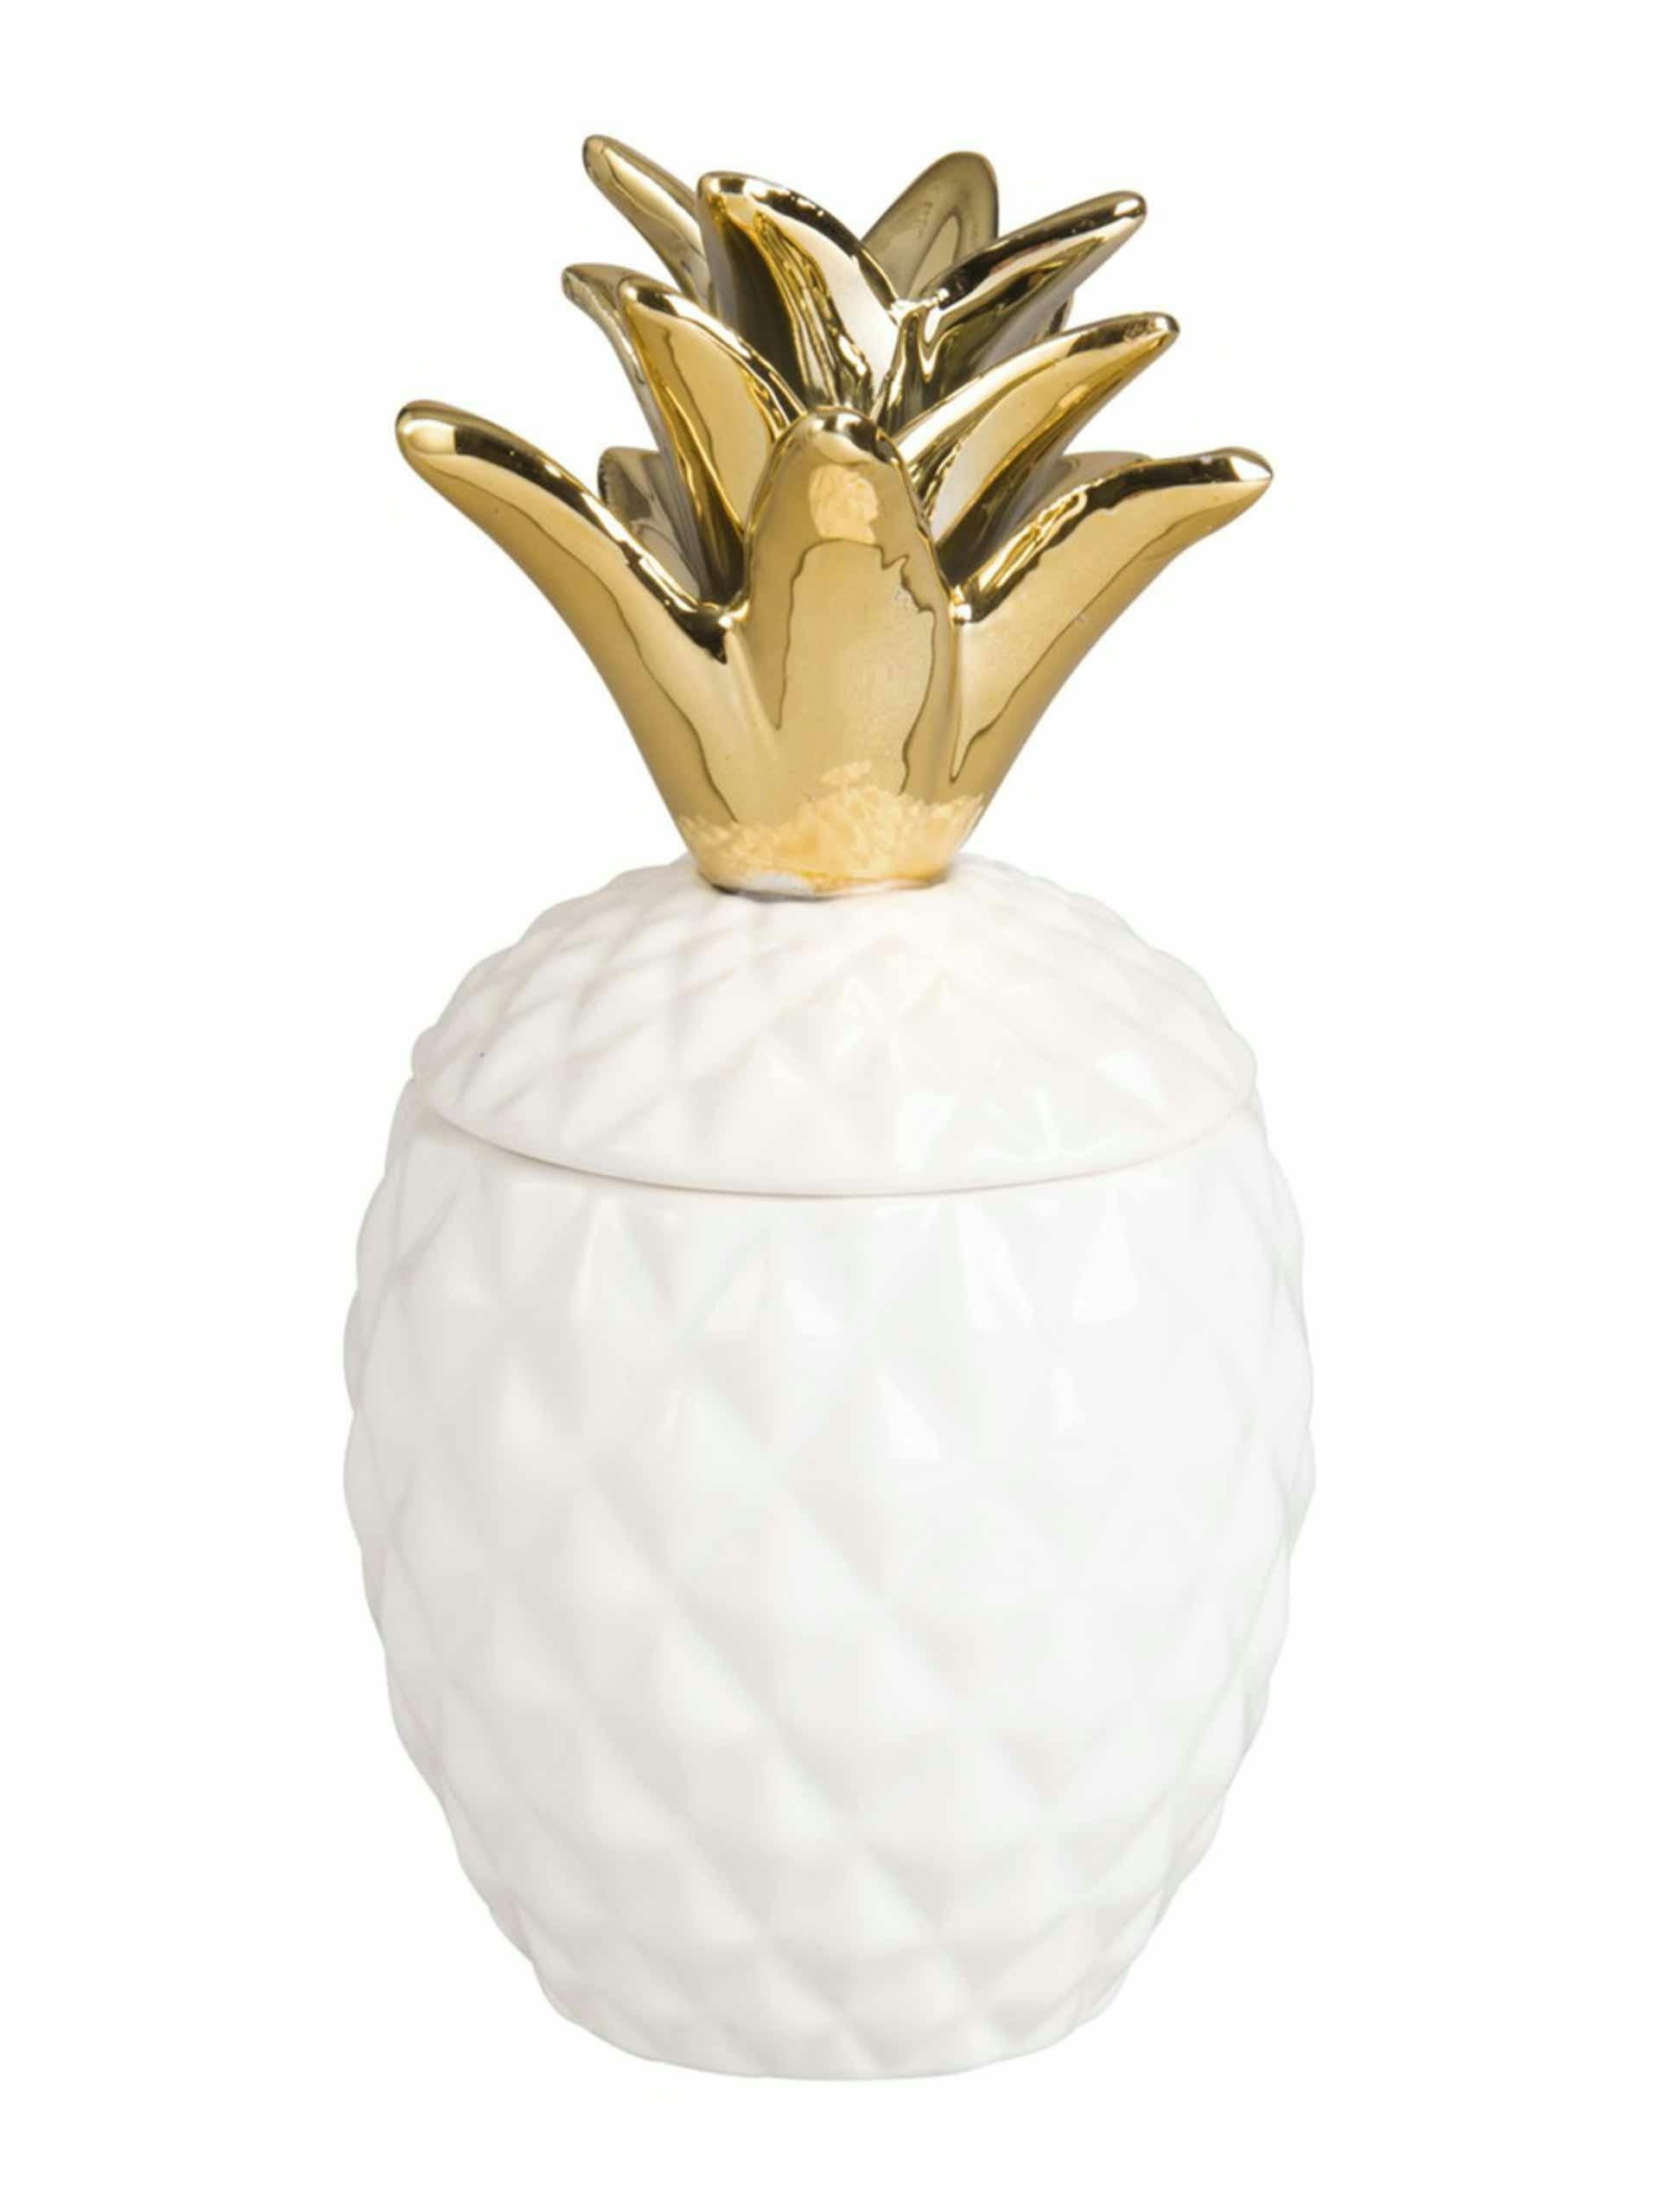 Pineapple candle with white ceramic holder